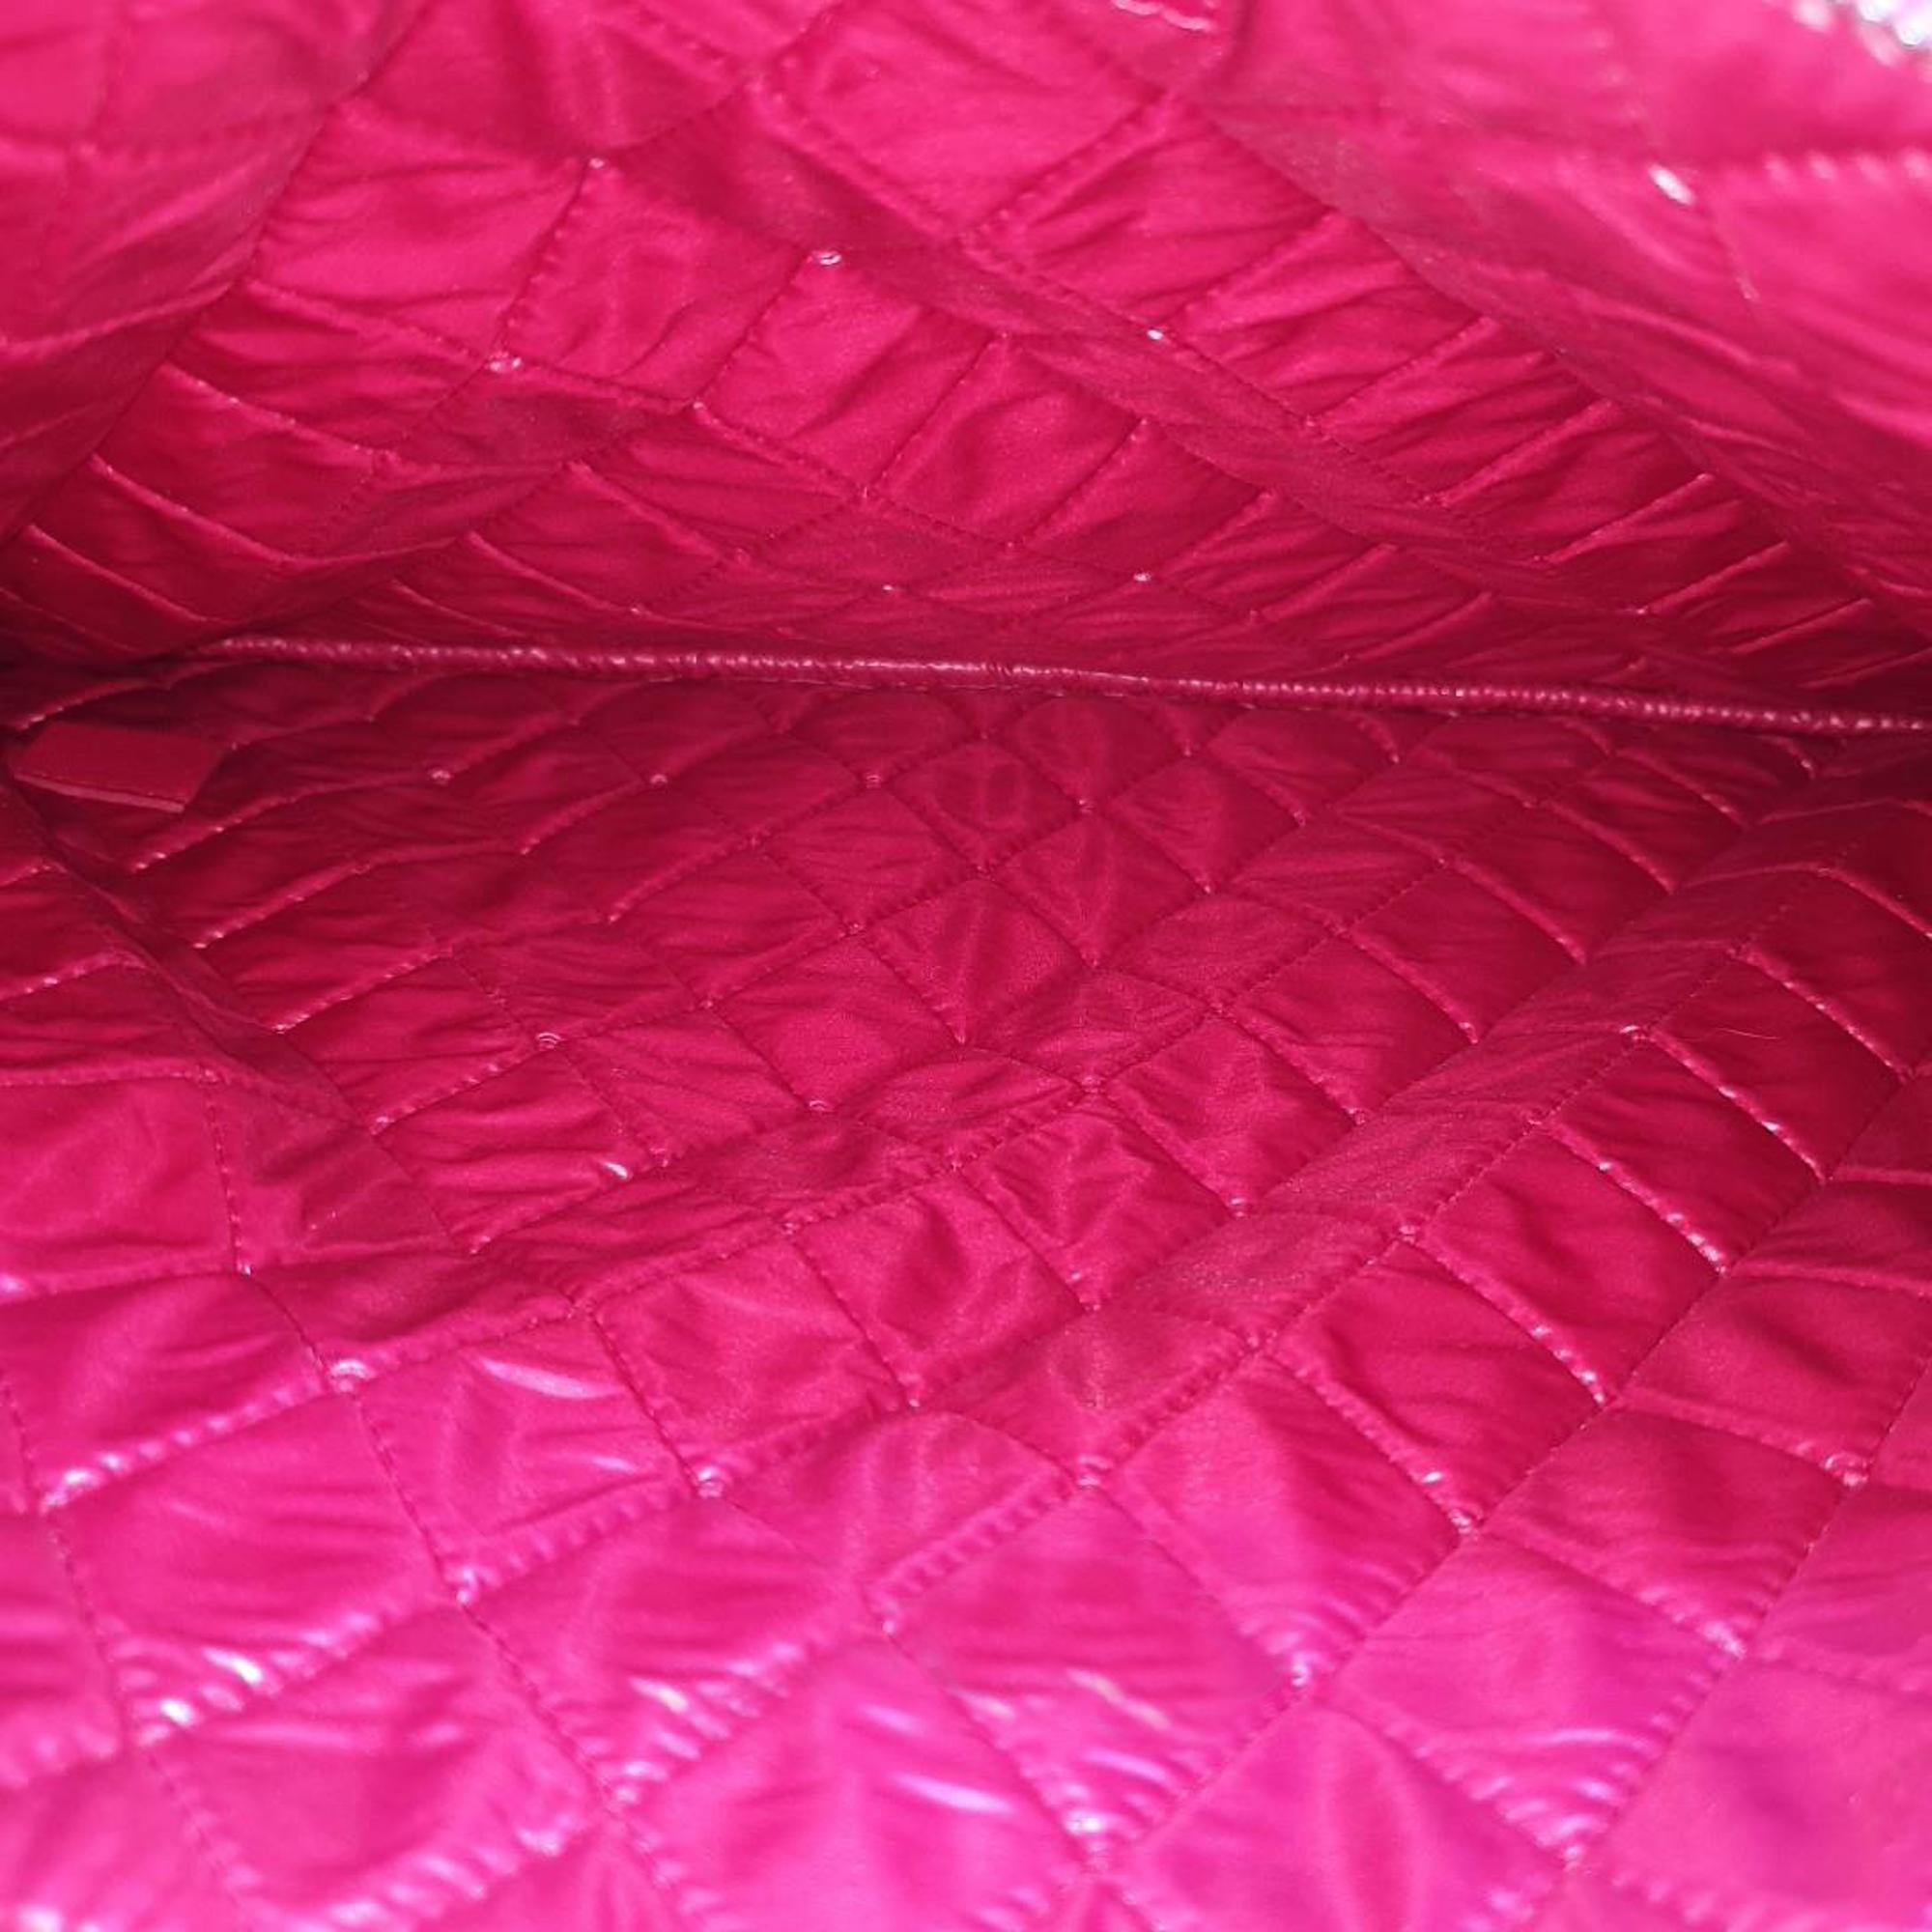 Chanel Red Leather Mademoiselle CC Clutch